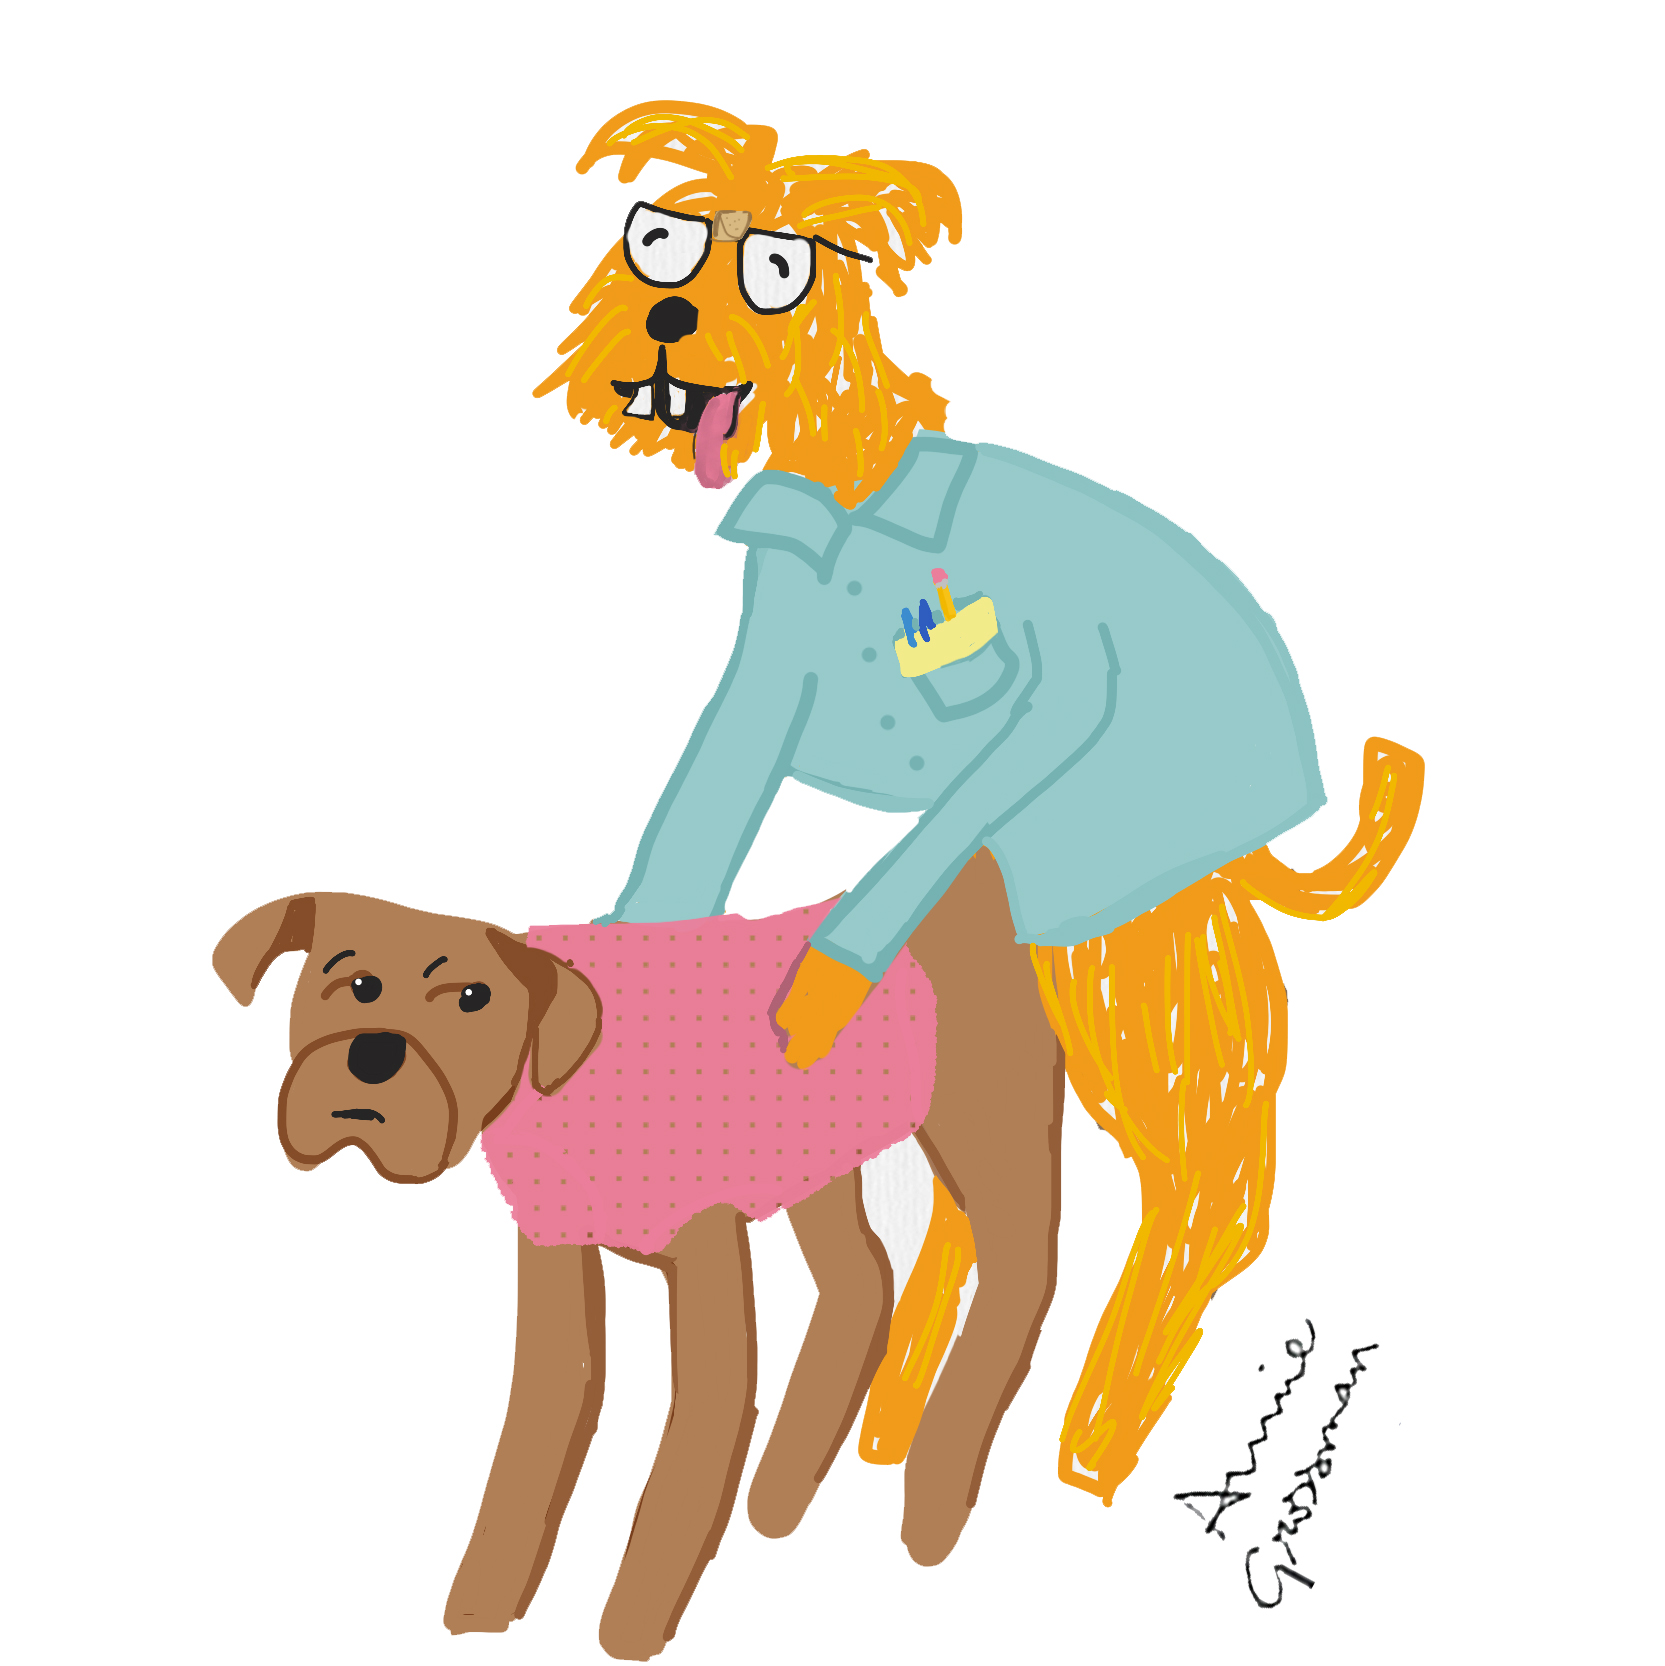 podcast episode on why dogs hump drawing by annie grossman of dogs humping